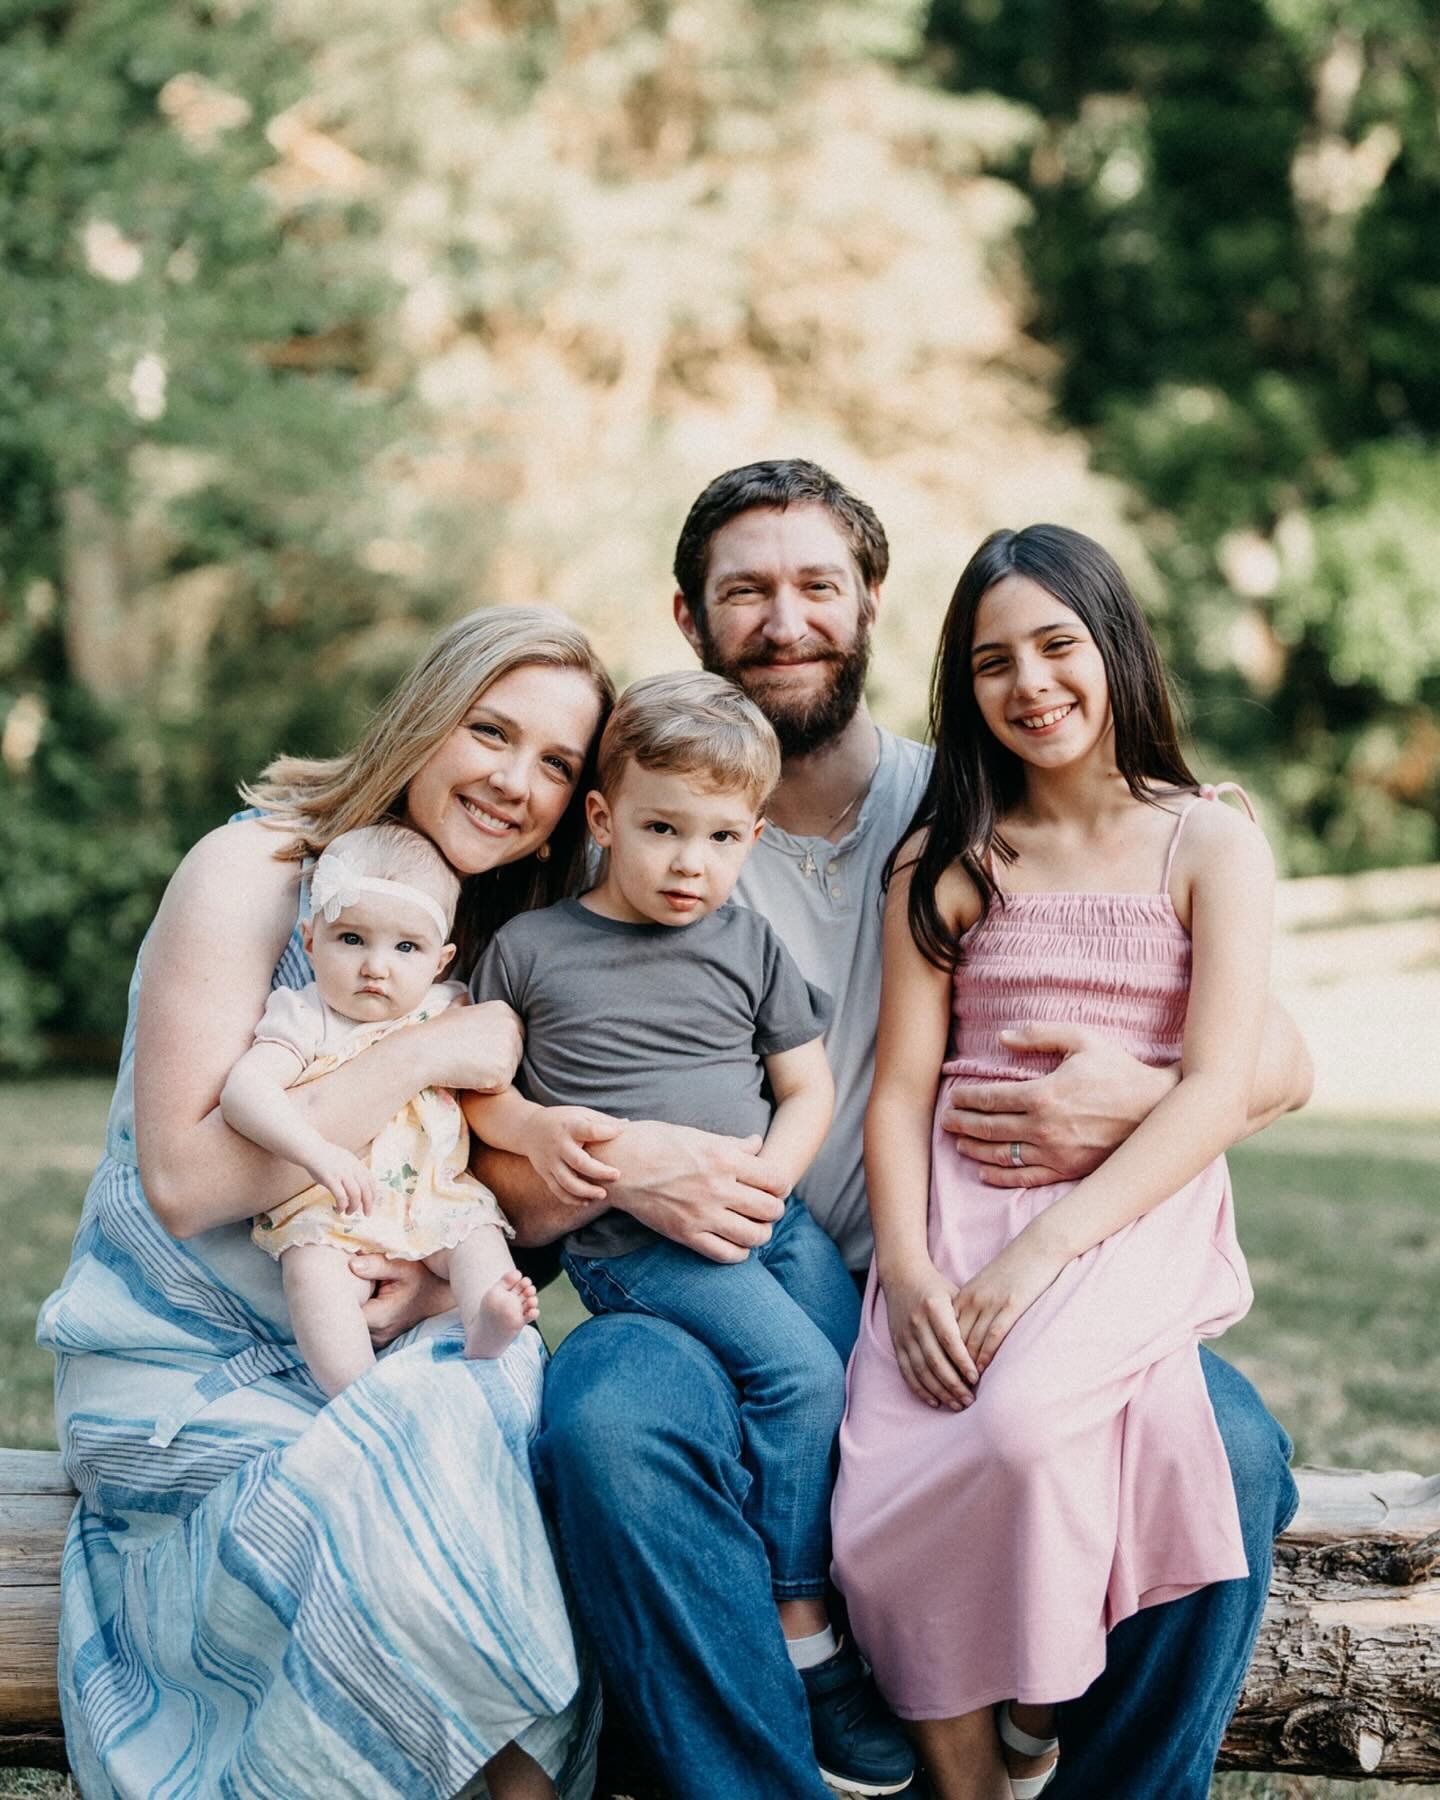 From their engagement to family of five😍, my couple&rsquo;s family is growing🥰. 
.
.
.
.
.
.
.
.
#brides #CharlotteWeddingPhotographers #ashevilleweddingphotographer #raleighweddingphotographer #CarolinaBride #NCwedding #LooksLikeFilm #weddinghair 